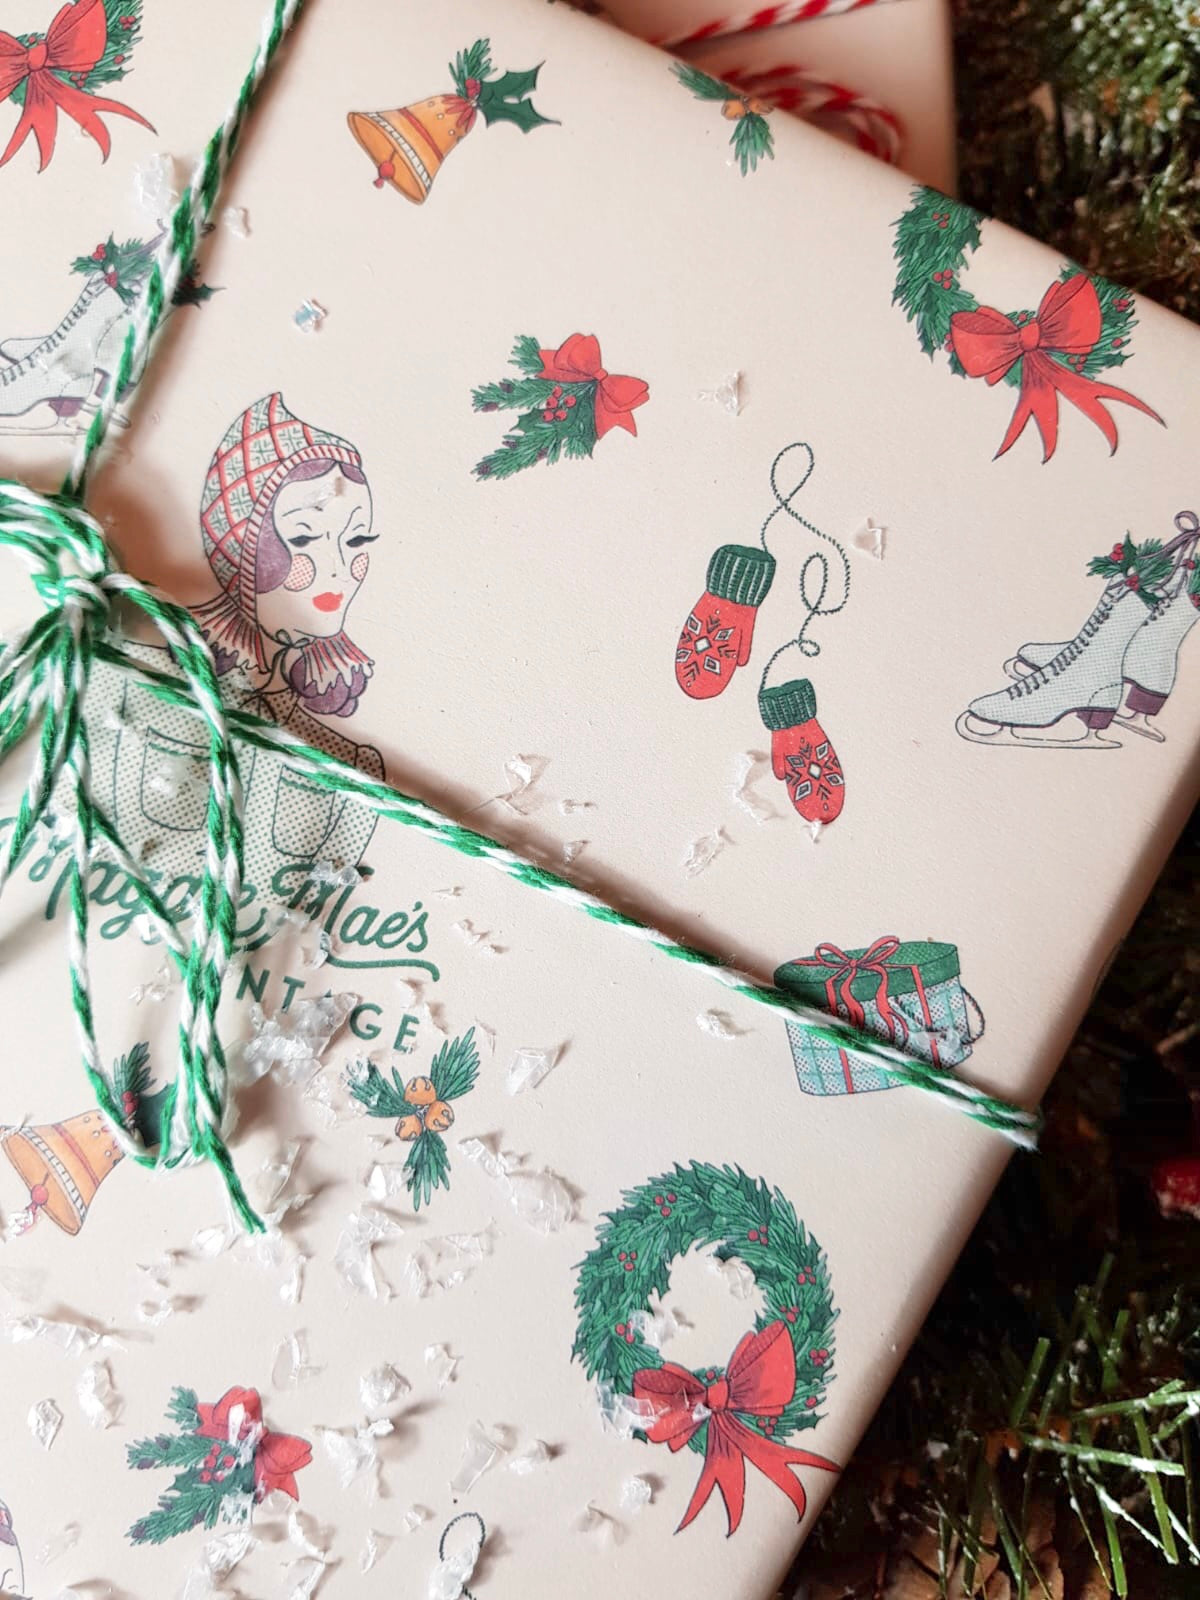 Exclusively Designed By Shropshire Illustrator Hannah Chumbley - Our Bespoke Festive Wrapping Paper Pr Sheet